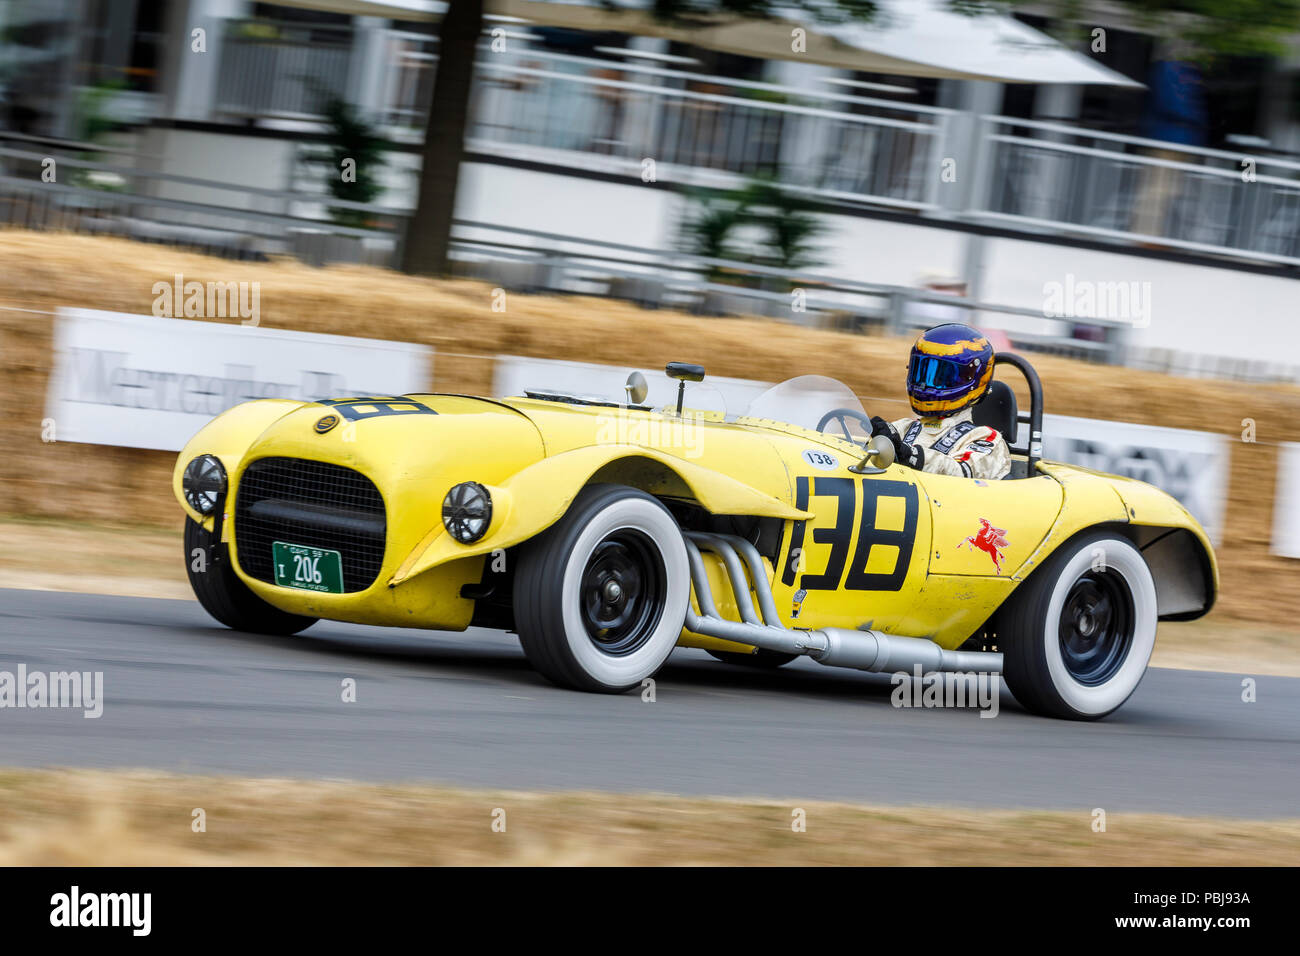 1959 Balchowsky-Buick 'Ol' Yeller II' endurance racer with driver Ernest Nagamatsu at the 2018 Goodwood Festival of Speed, Sussex, UK. Stock Photo